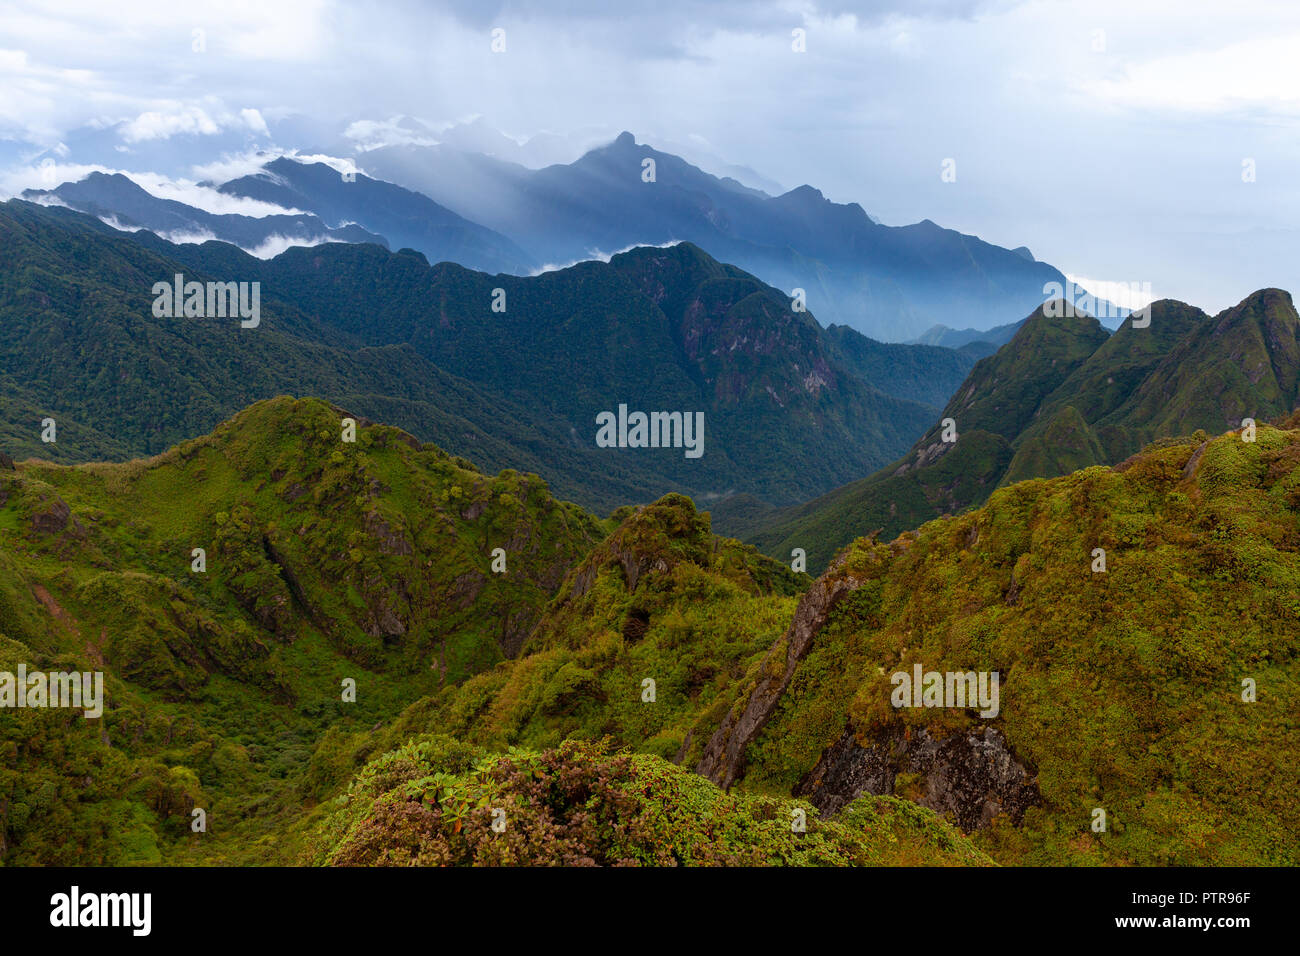 Stunning view of the mountainous terrain from the summit of the highest Indochina peak, the Fansipan Mountain, Sapa, Lao Cai, Vietnam Stock Photo